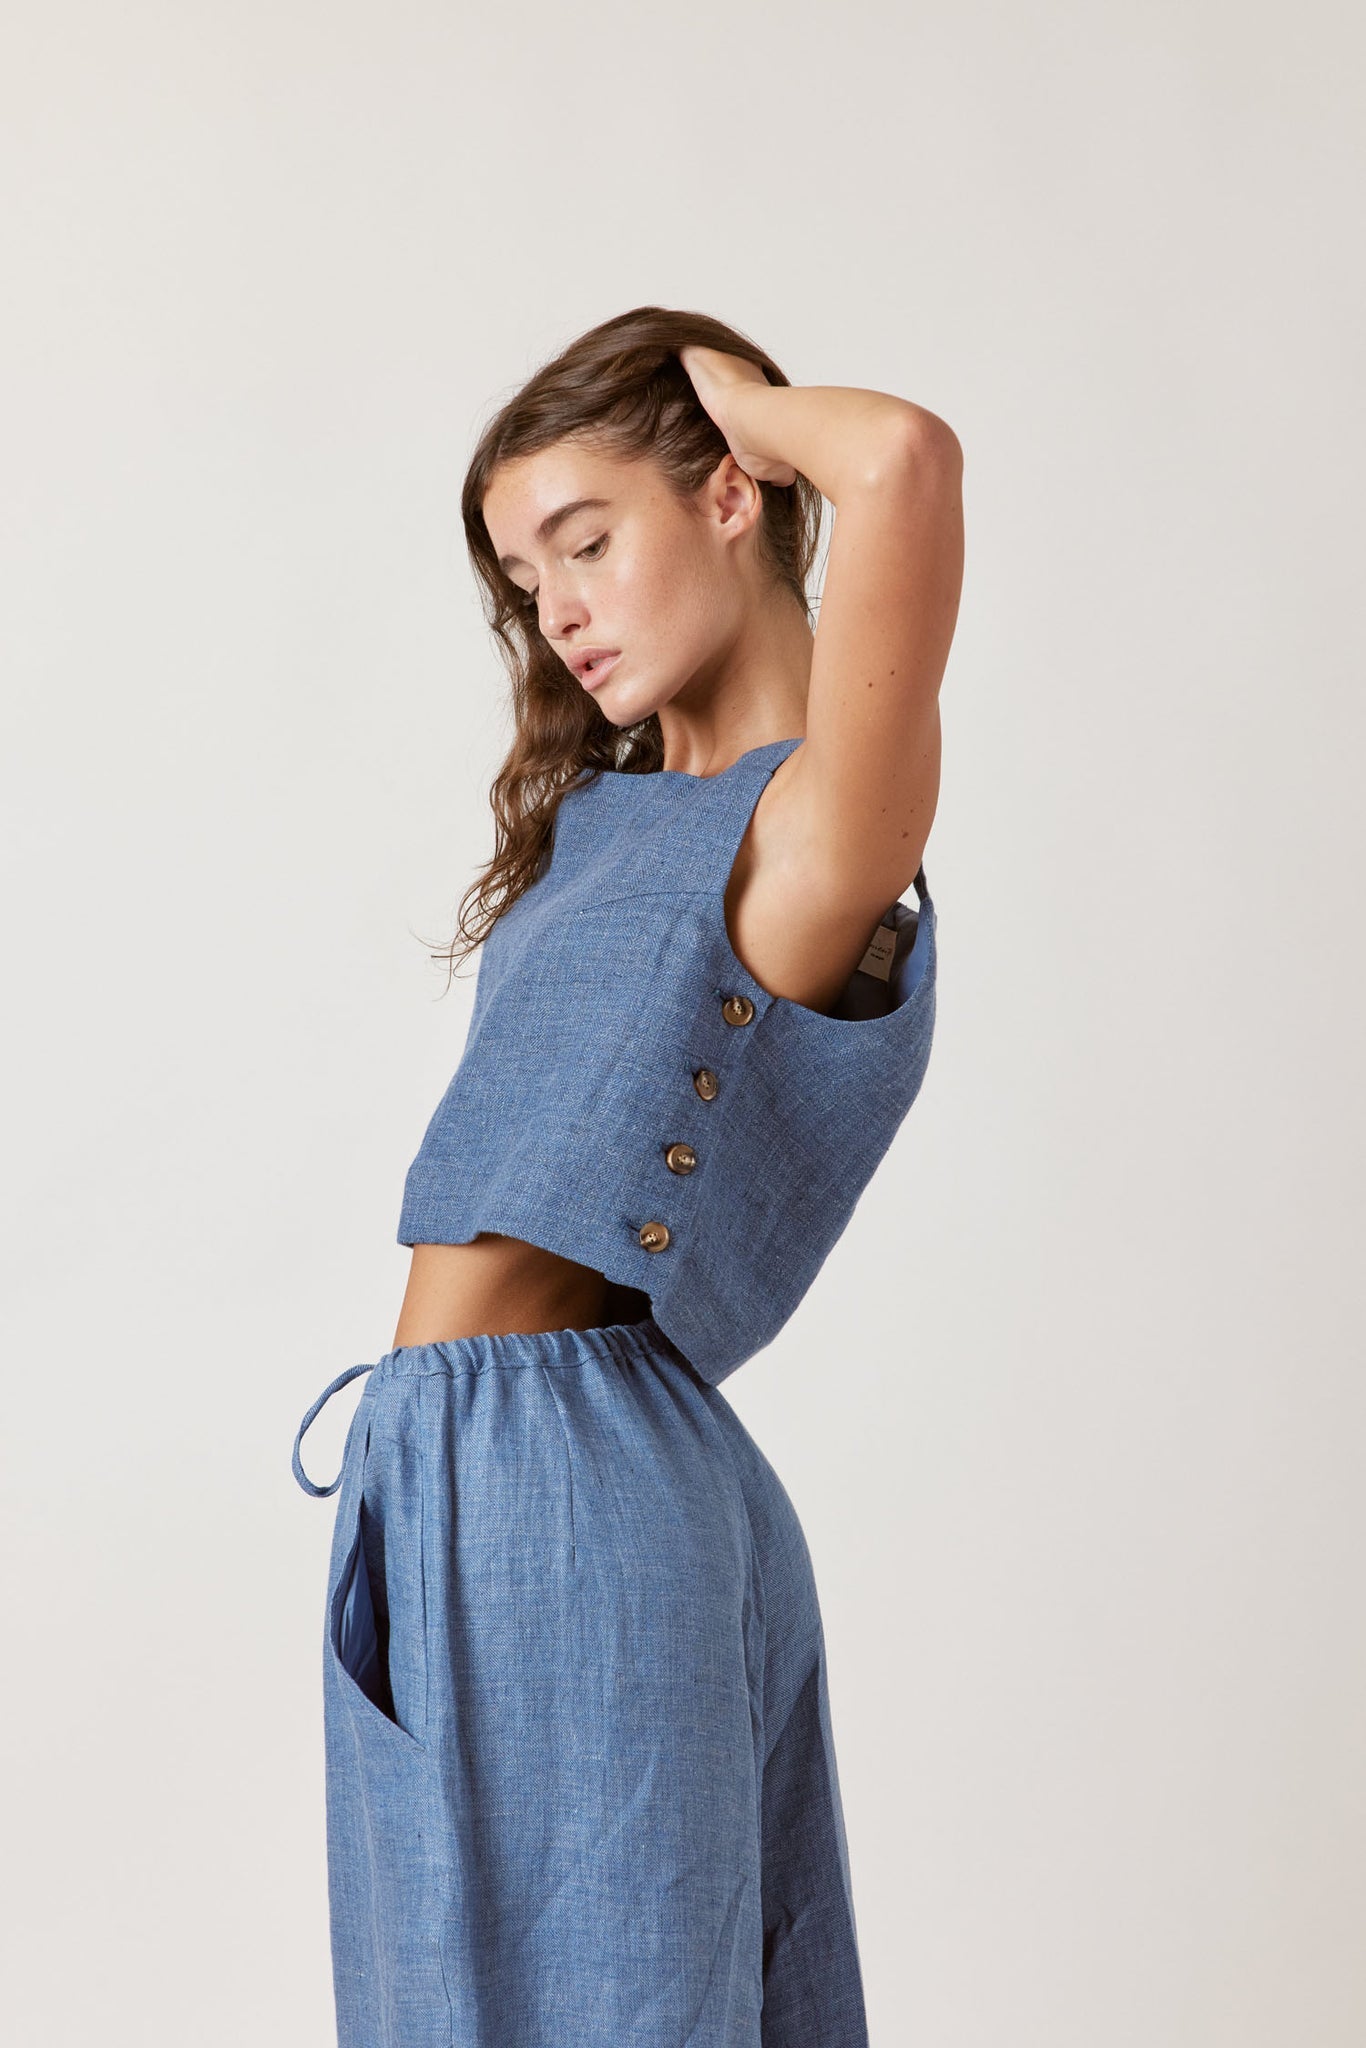 amente / This crop top is crafted from high-quality linen, offering a soft and breathable feel, perfect for warmer days. Designed with a boxed silhouette, it exudes a contemporary and relaxed vibe, making it a chic choice for casual outings or beach days.